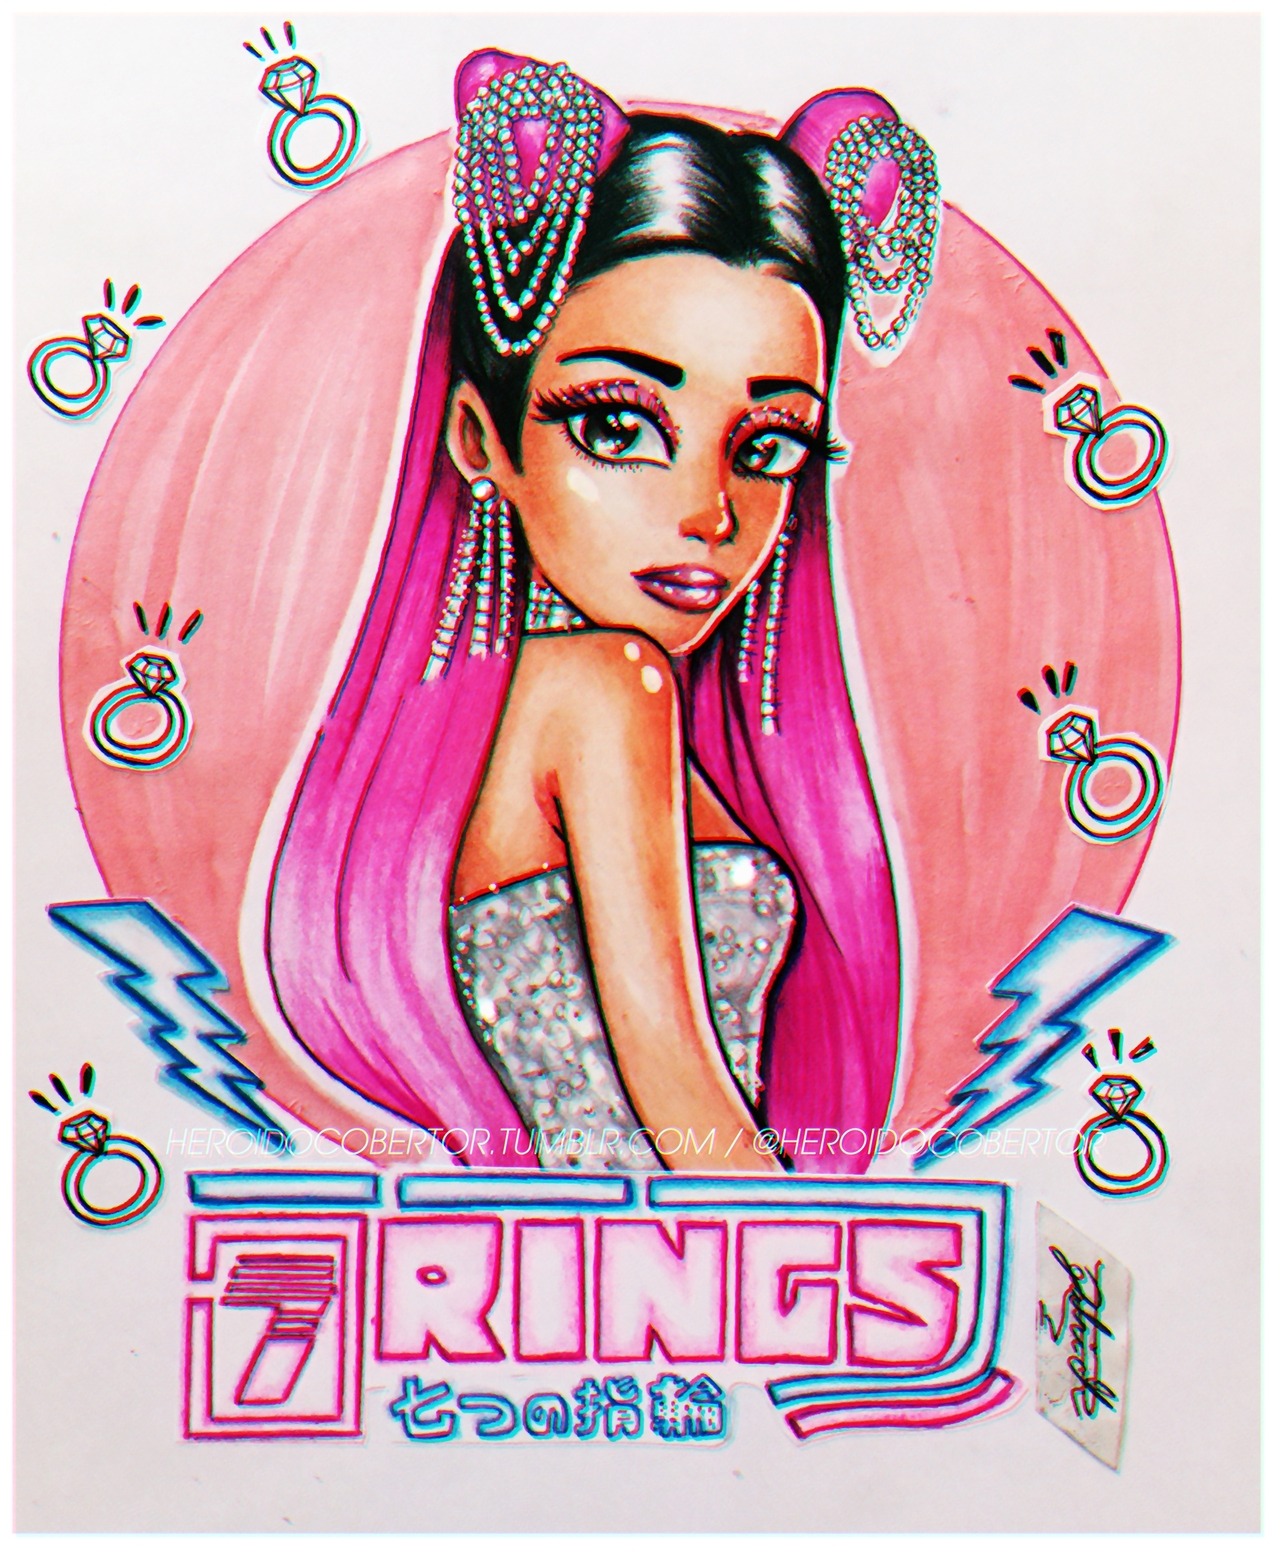 7 Rings Animated Remake - Ariana Grande - (Official Music Video) - YouTube